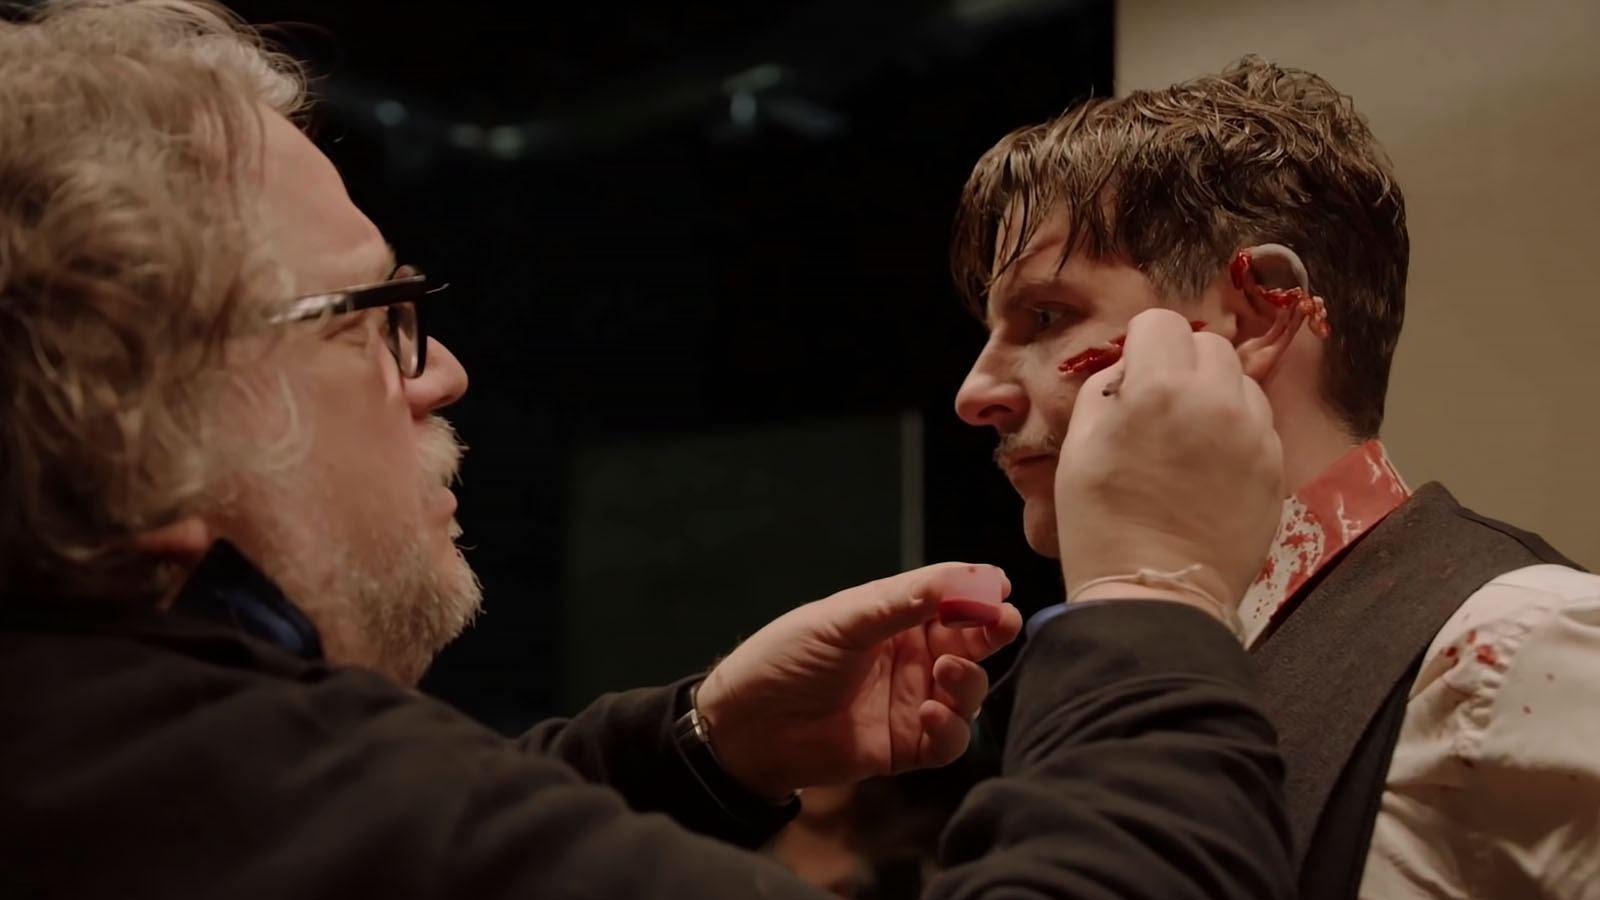 Guillermo del Toro takes a hands-on approach to Bradley Cooper’s makeup in Nightmare Alley. Image © Searchlight Pictures